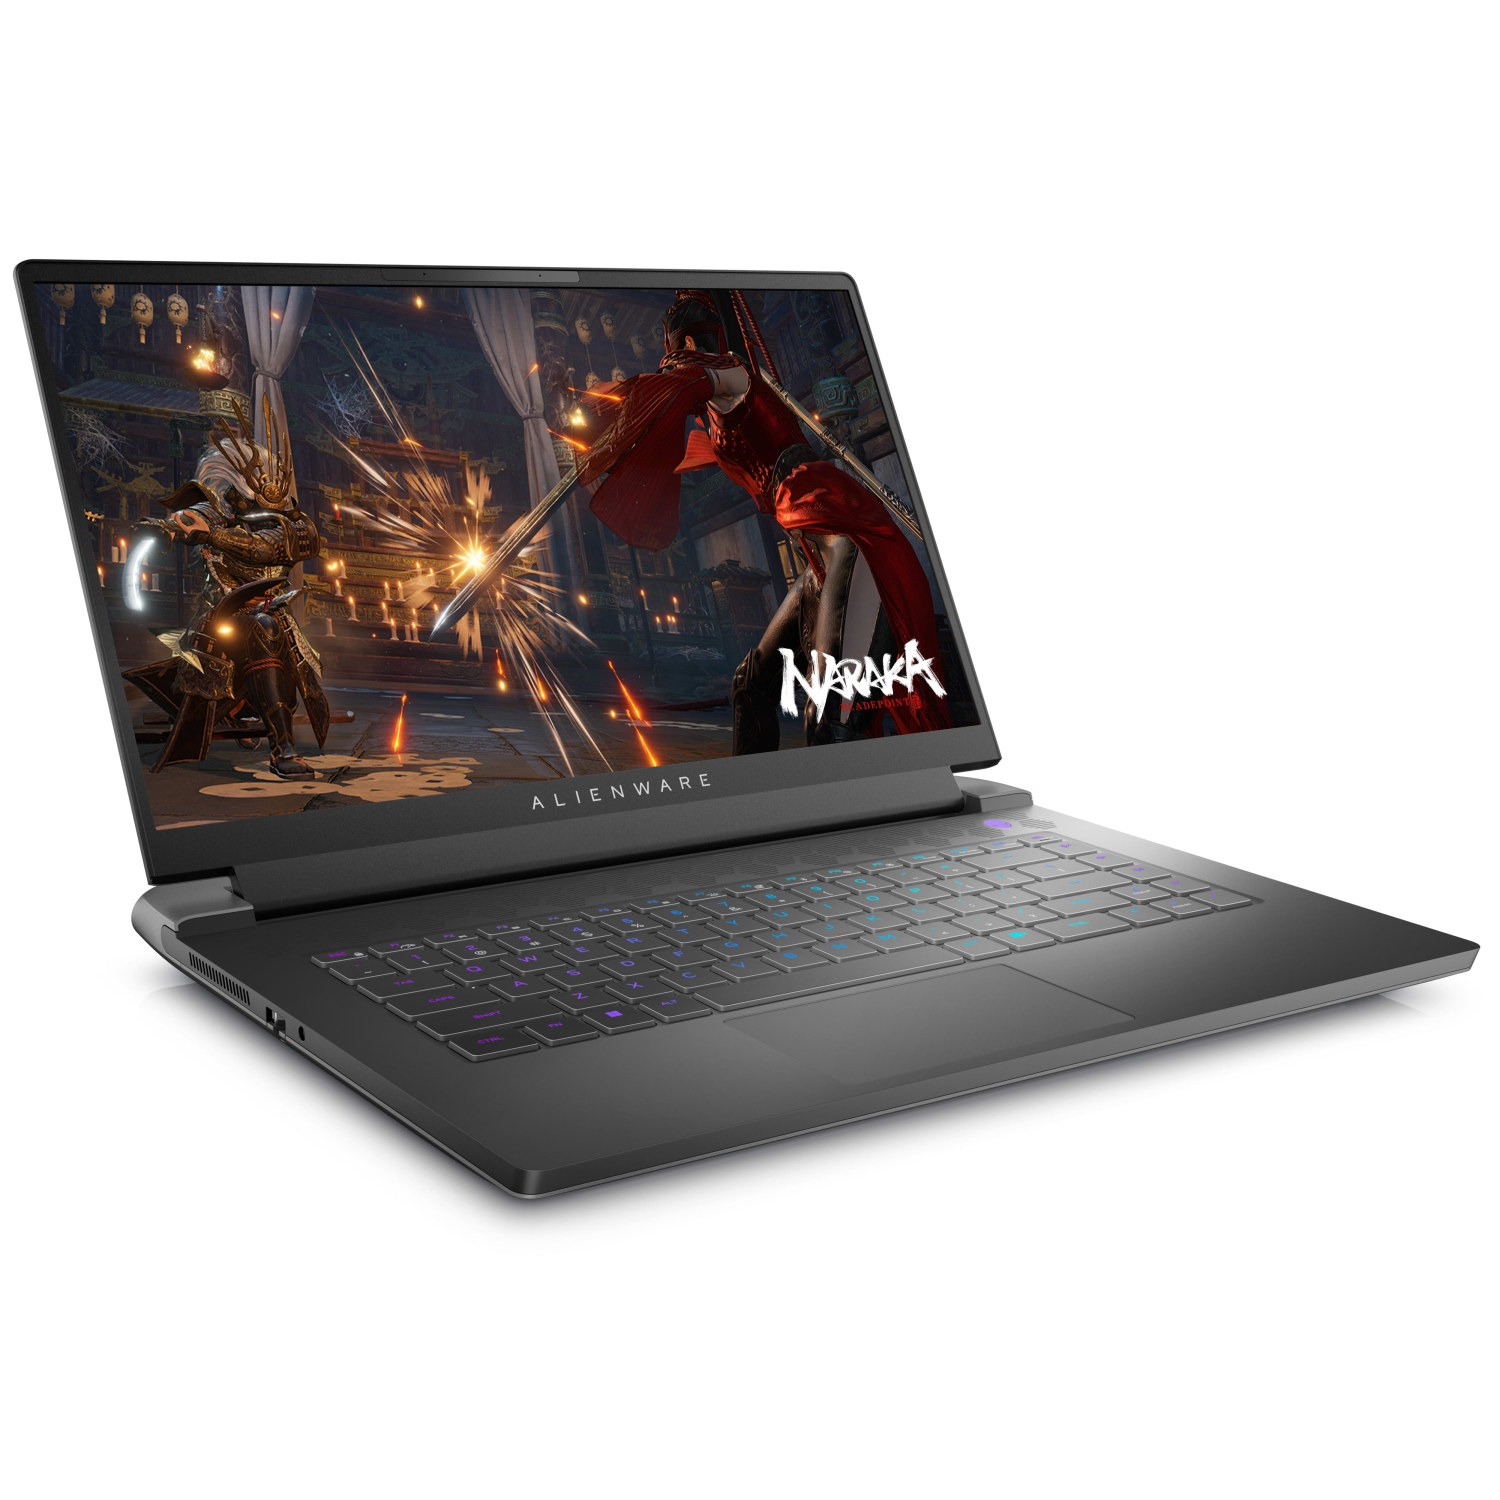 Refurbished (Excellent) – Dell Alienware m15 R7 Gaming Laptop (2022) | 15.6" FHD | Core i9 - 2TB SSD + 2TB SSD - 64GB RAM - 3070 Ti | 14 Cores @ 5 GHz - 12th Gen CPU - 8GB GDDR5